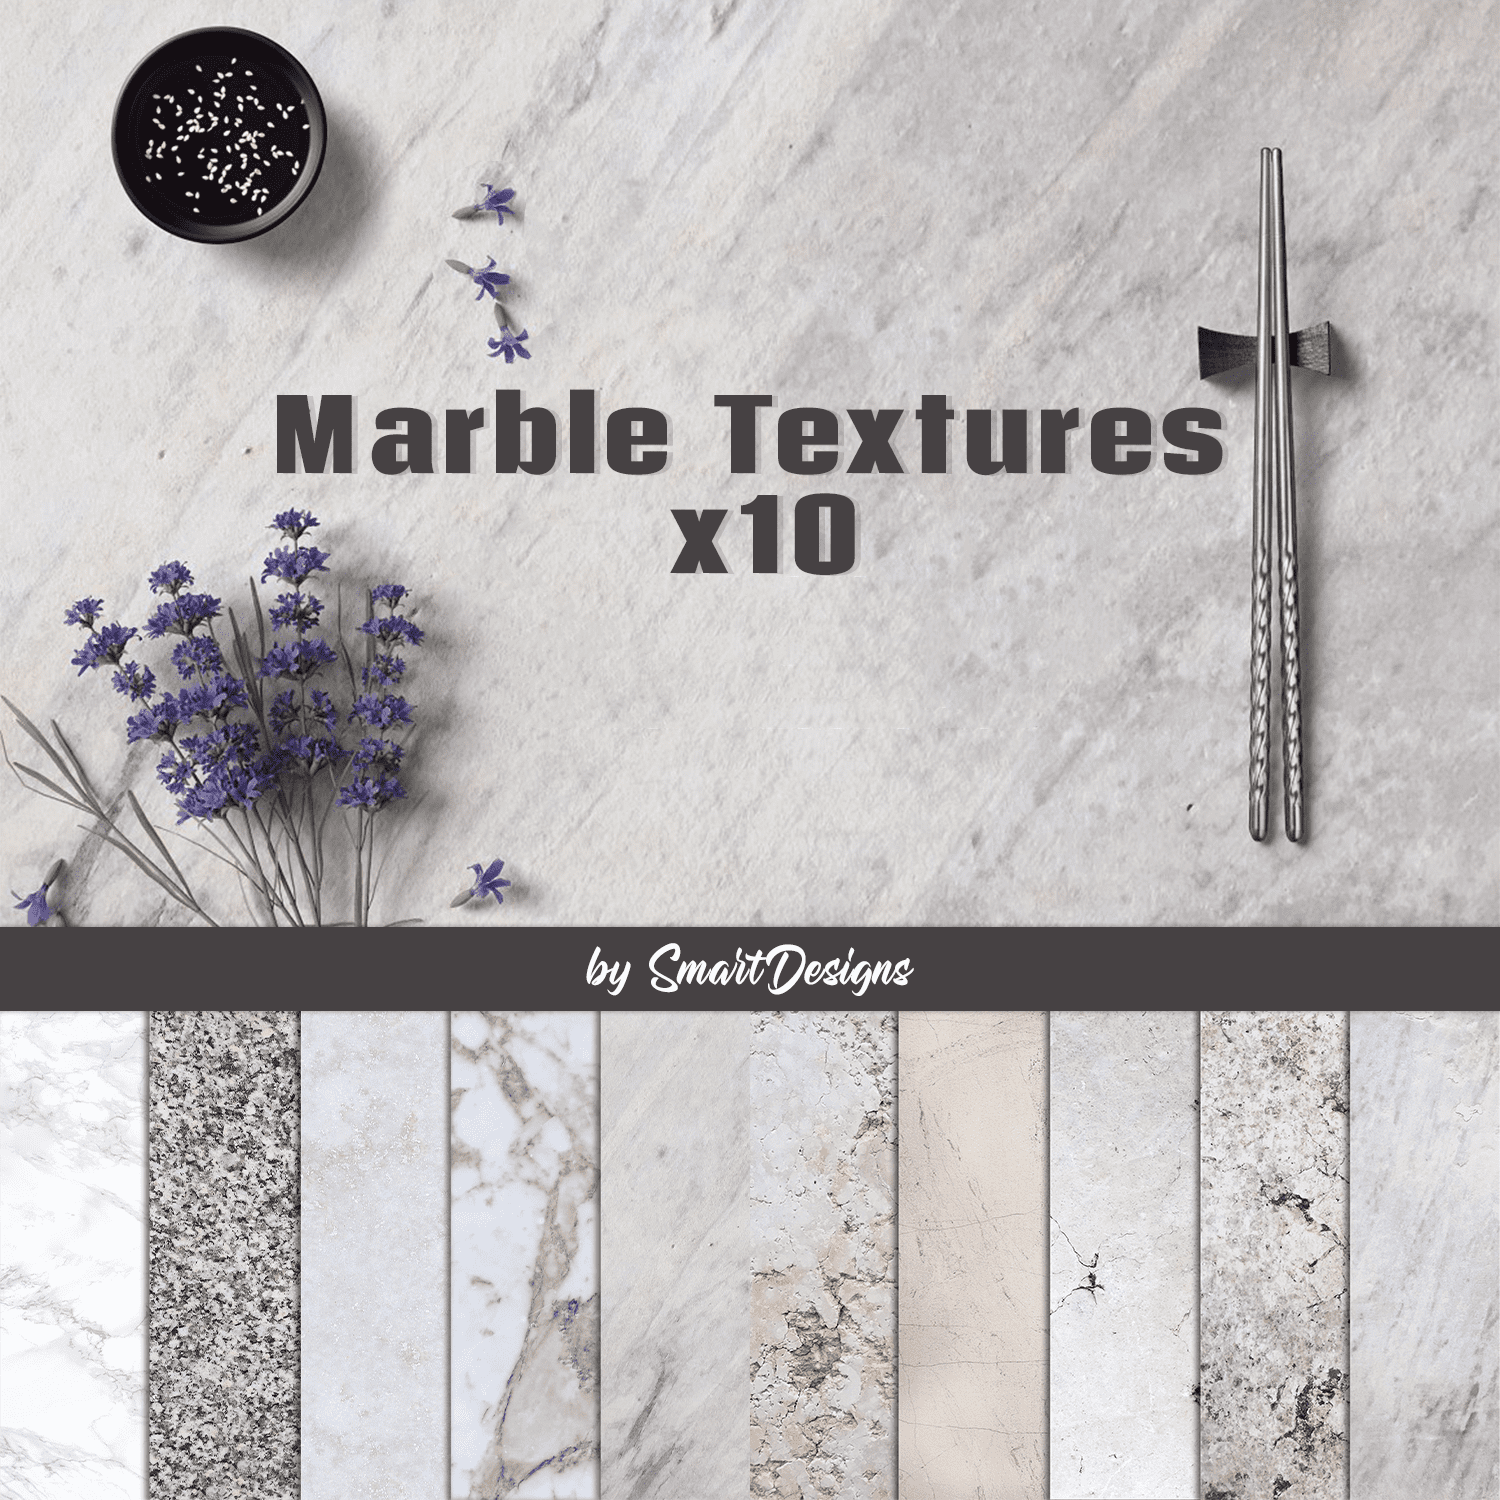 Prints of marble textures.